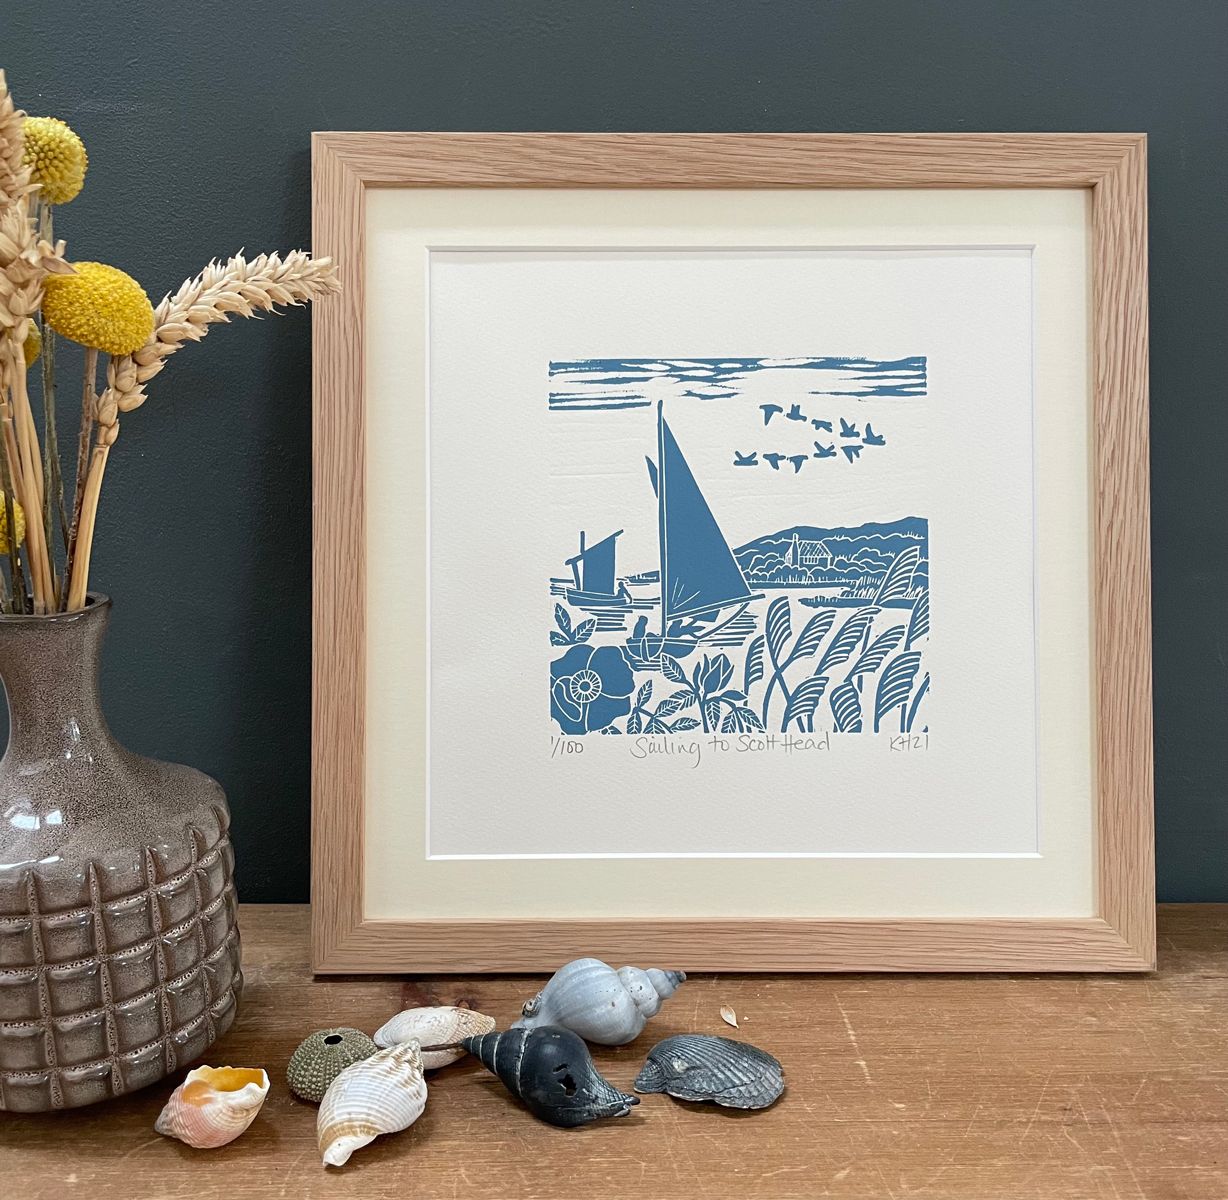 Sailing to Scolt Head by Kate Heiss - Secondary Image